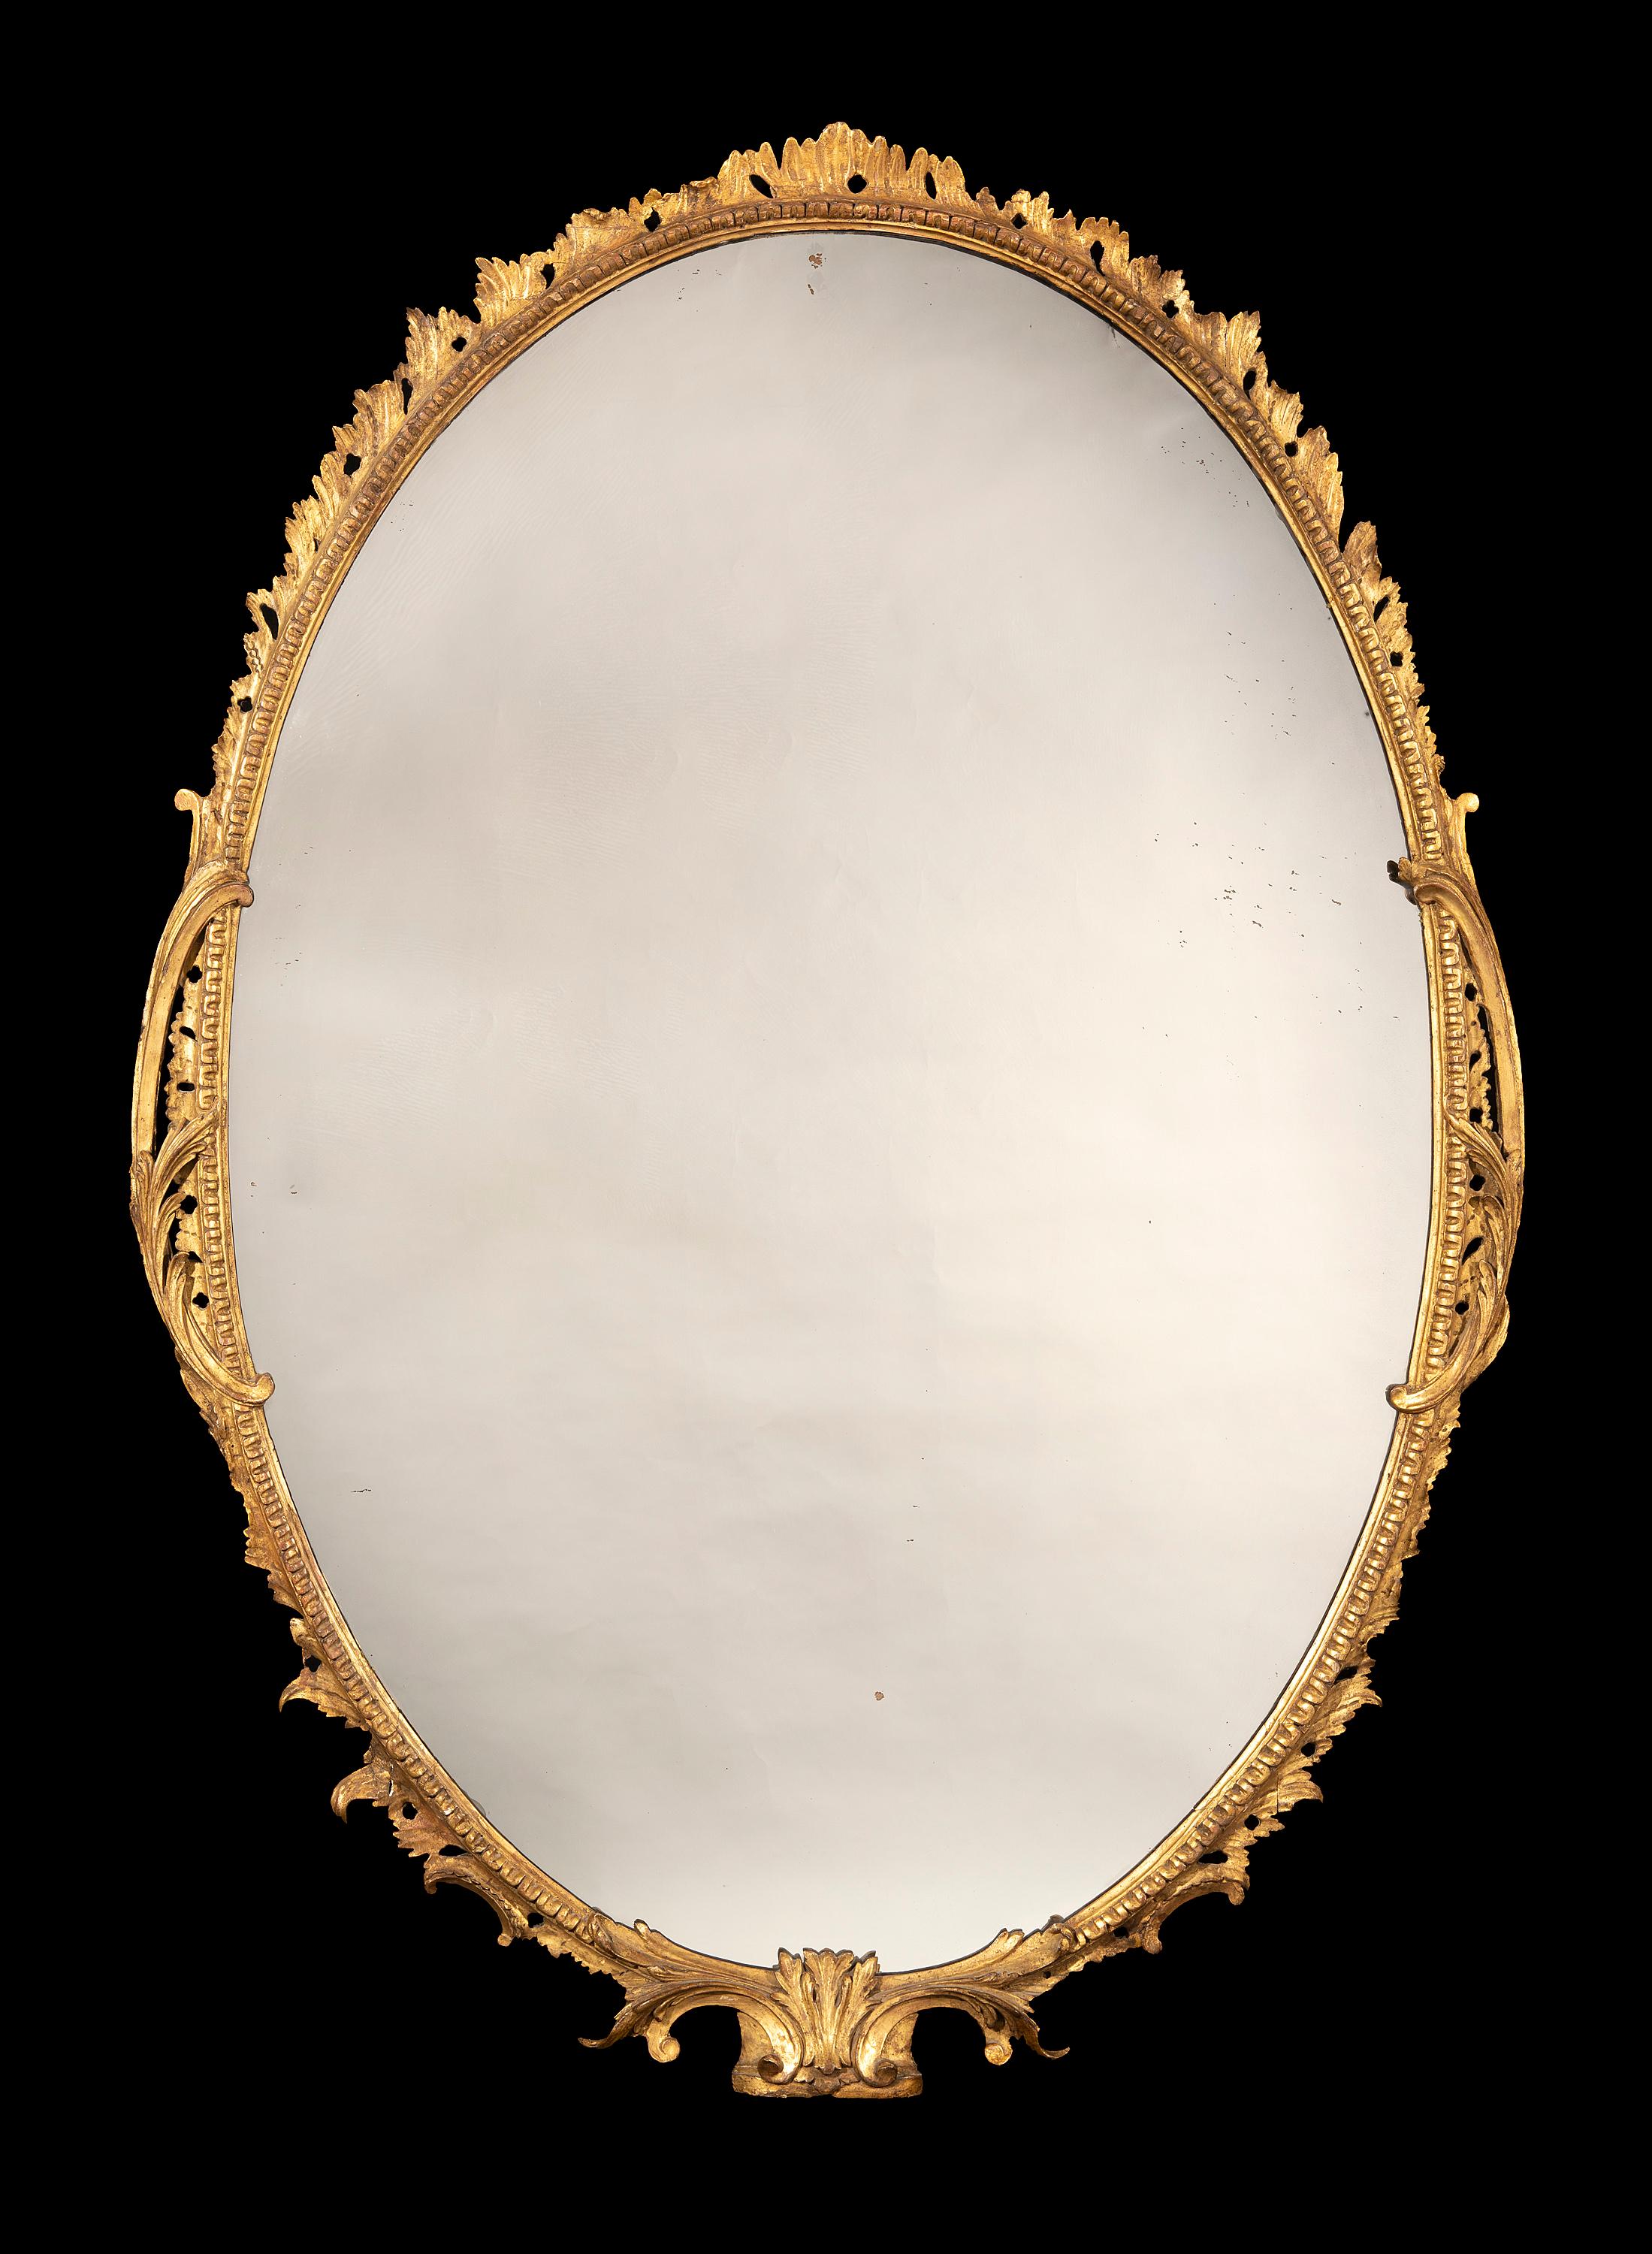 The large carved giltwood frame retains a lot of the old gilding and gesso as well as the original mercury plate.